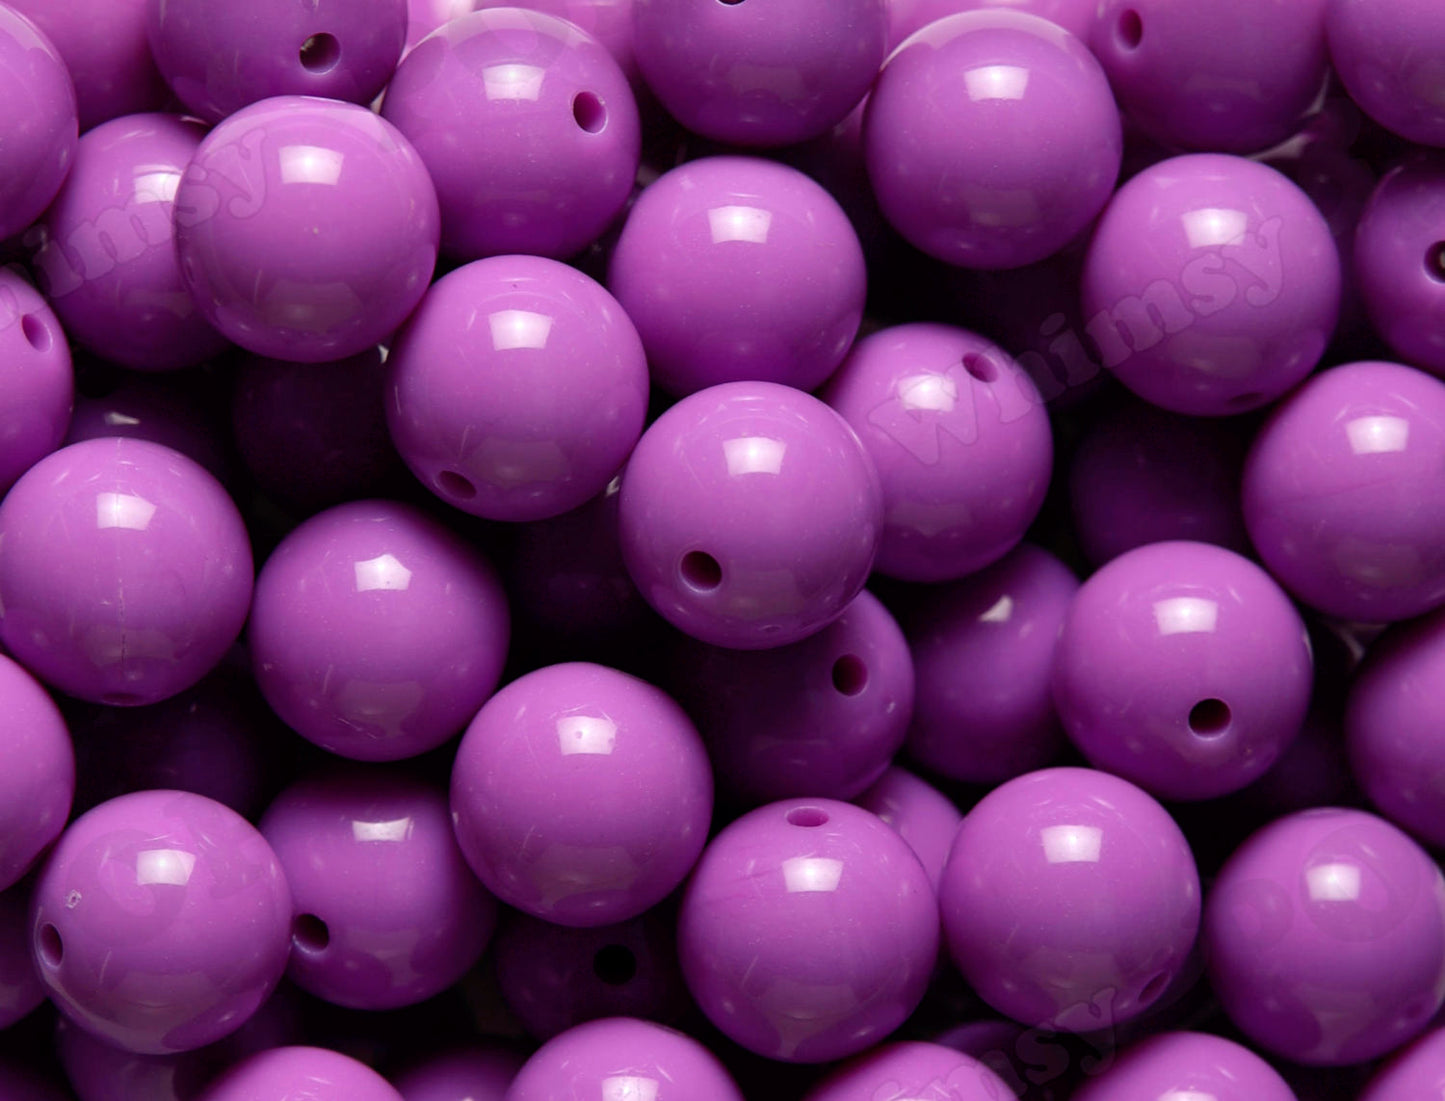 Lilac Purple 20mm Solid Bubblegum Beads for DIY Jewelry by WhimsyandPOP